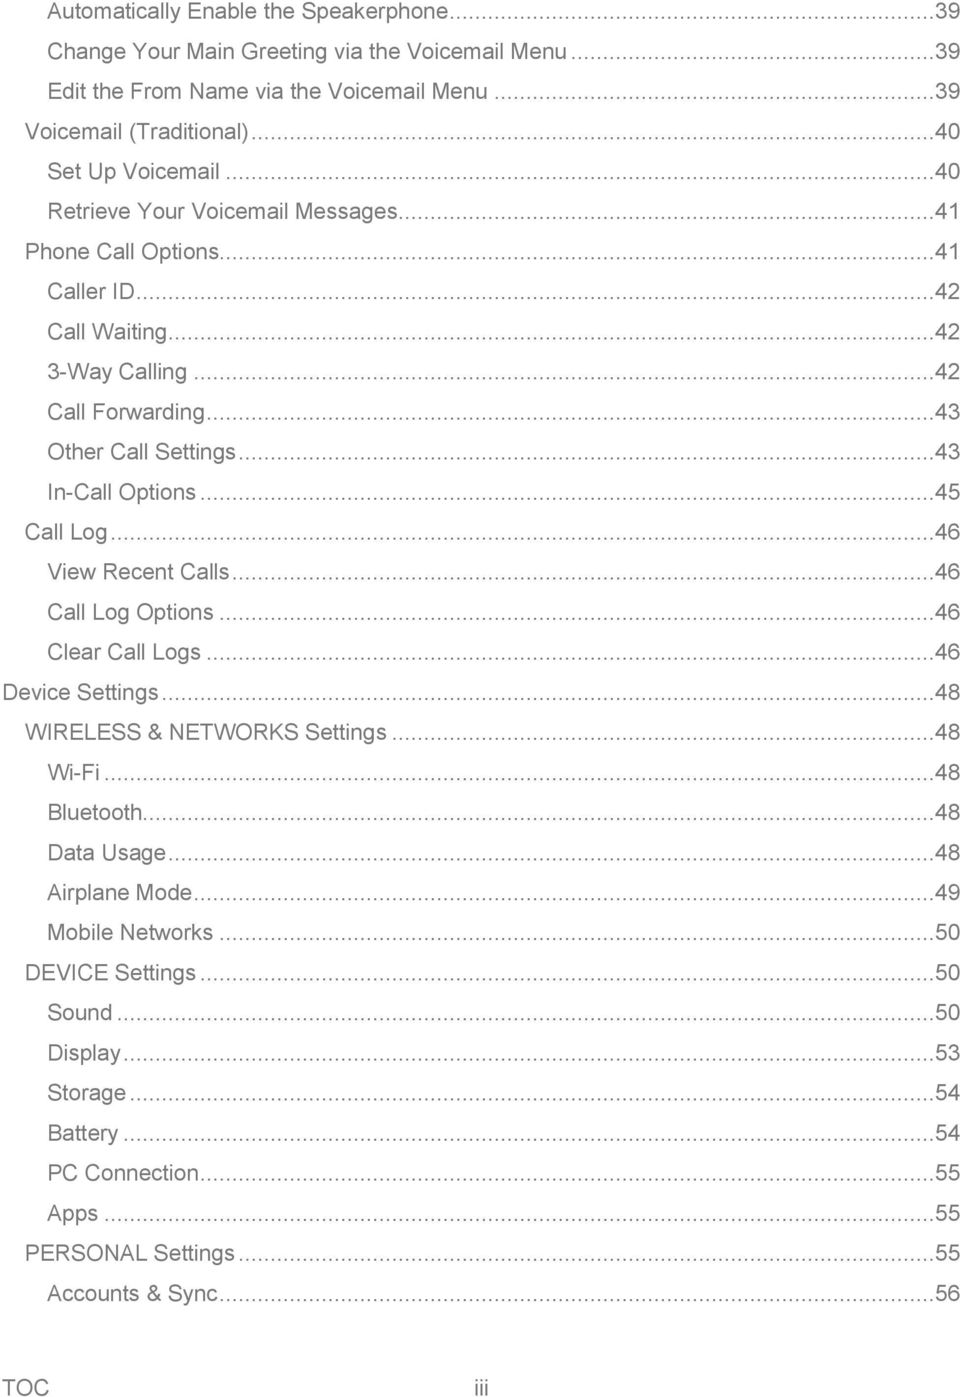 ..43 In-Call Options...45 Call Log...46 View Recent Calls...46 Call Log Options...46 Clear Call Logs...46 Device Settings...48 WIRELESS & NETWORKS Settings...48 Wi-Fi...48 Bluetooth.